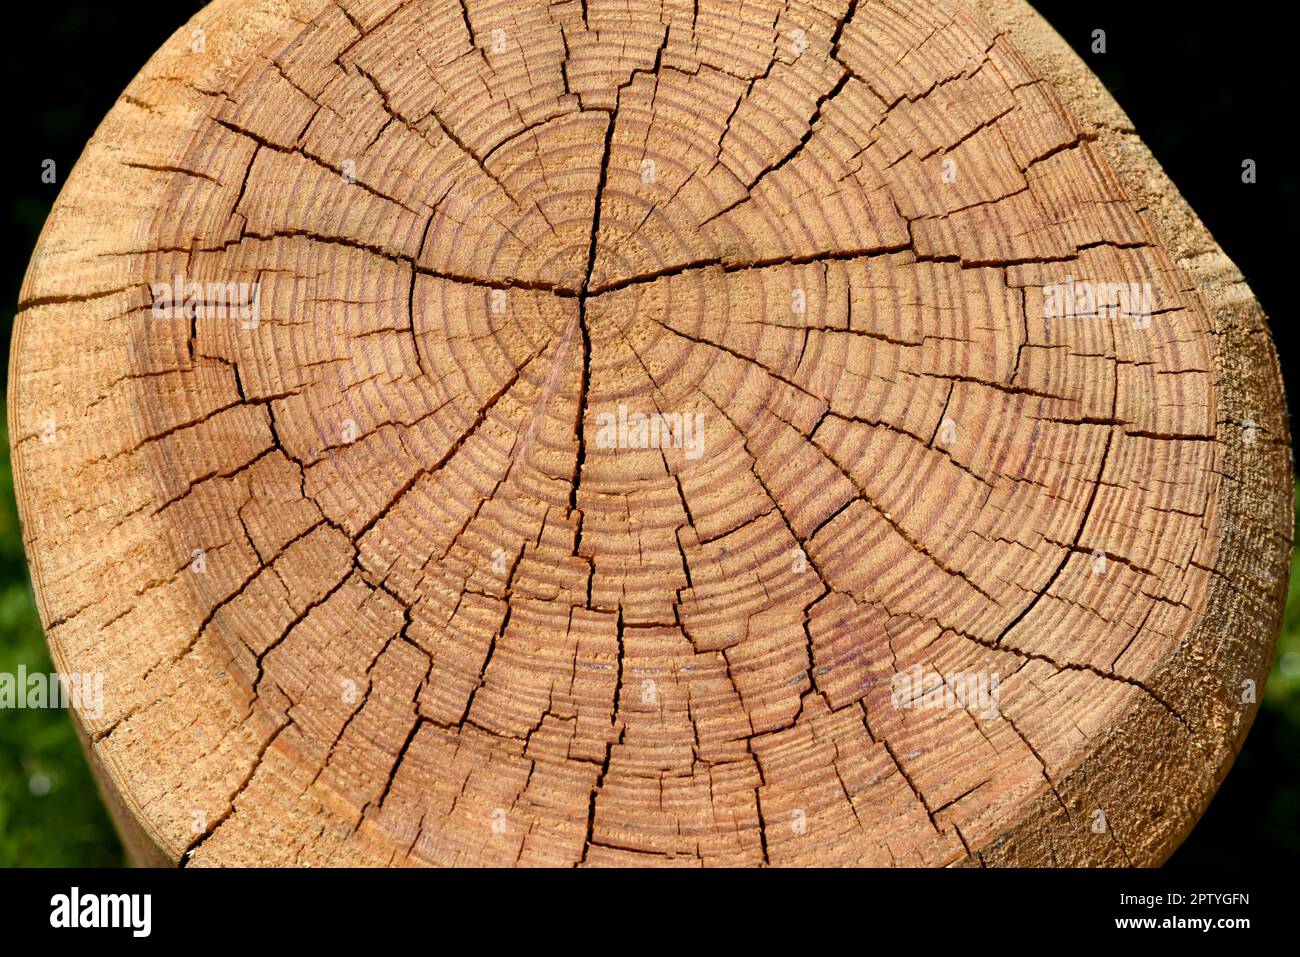 Annual tree growth rings with brown tonesdrawing Vector Image